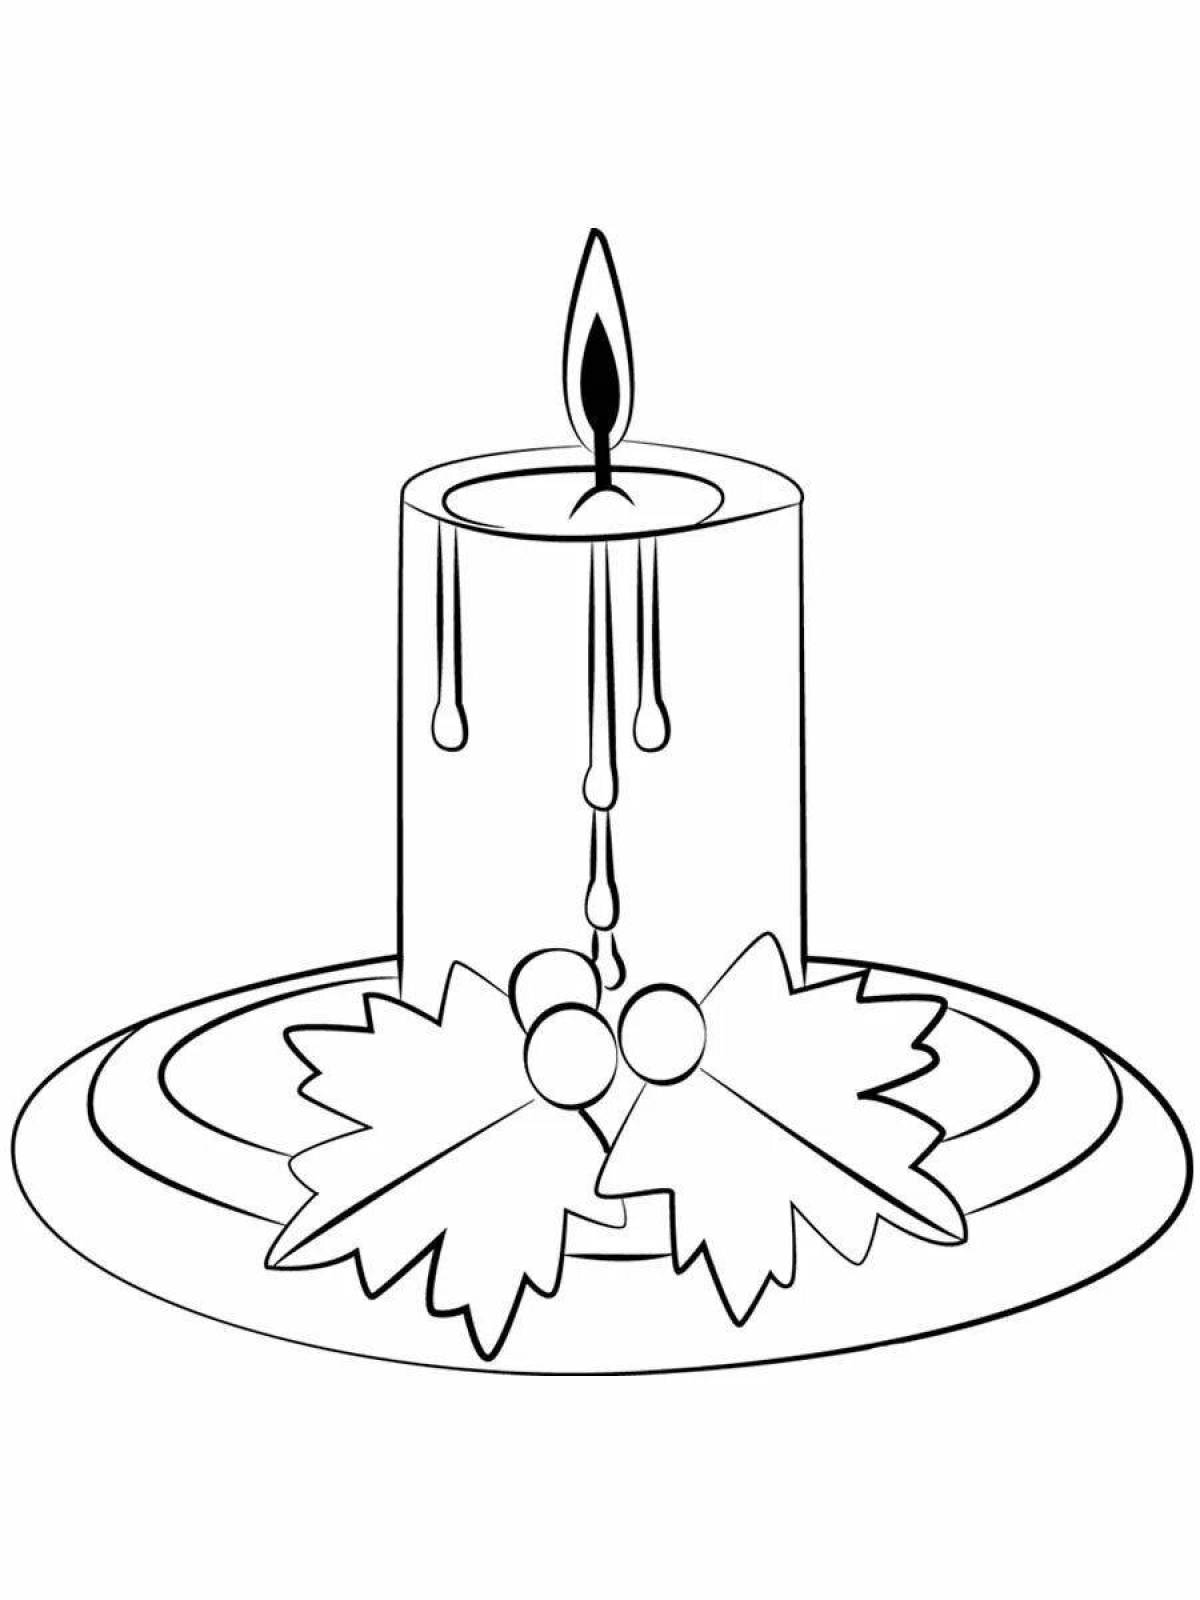 Amazing Christmas candle coloring page